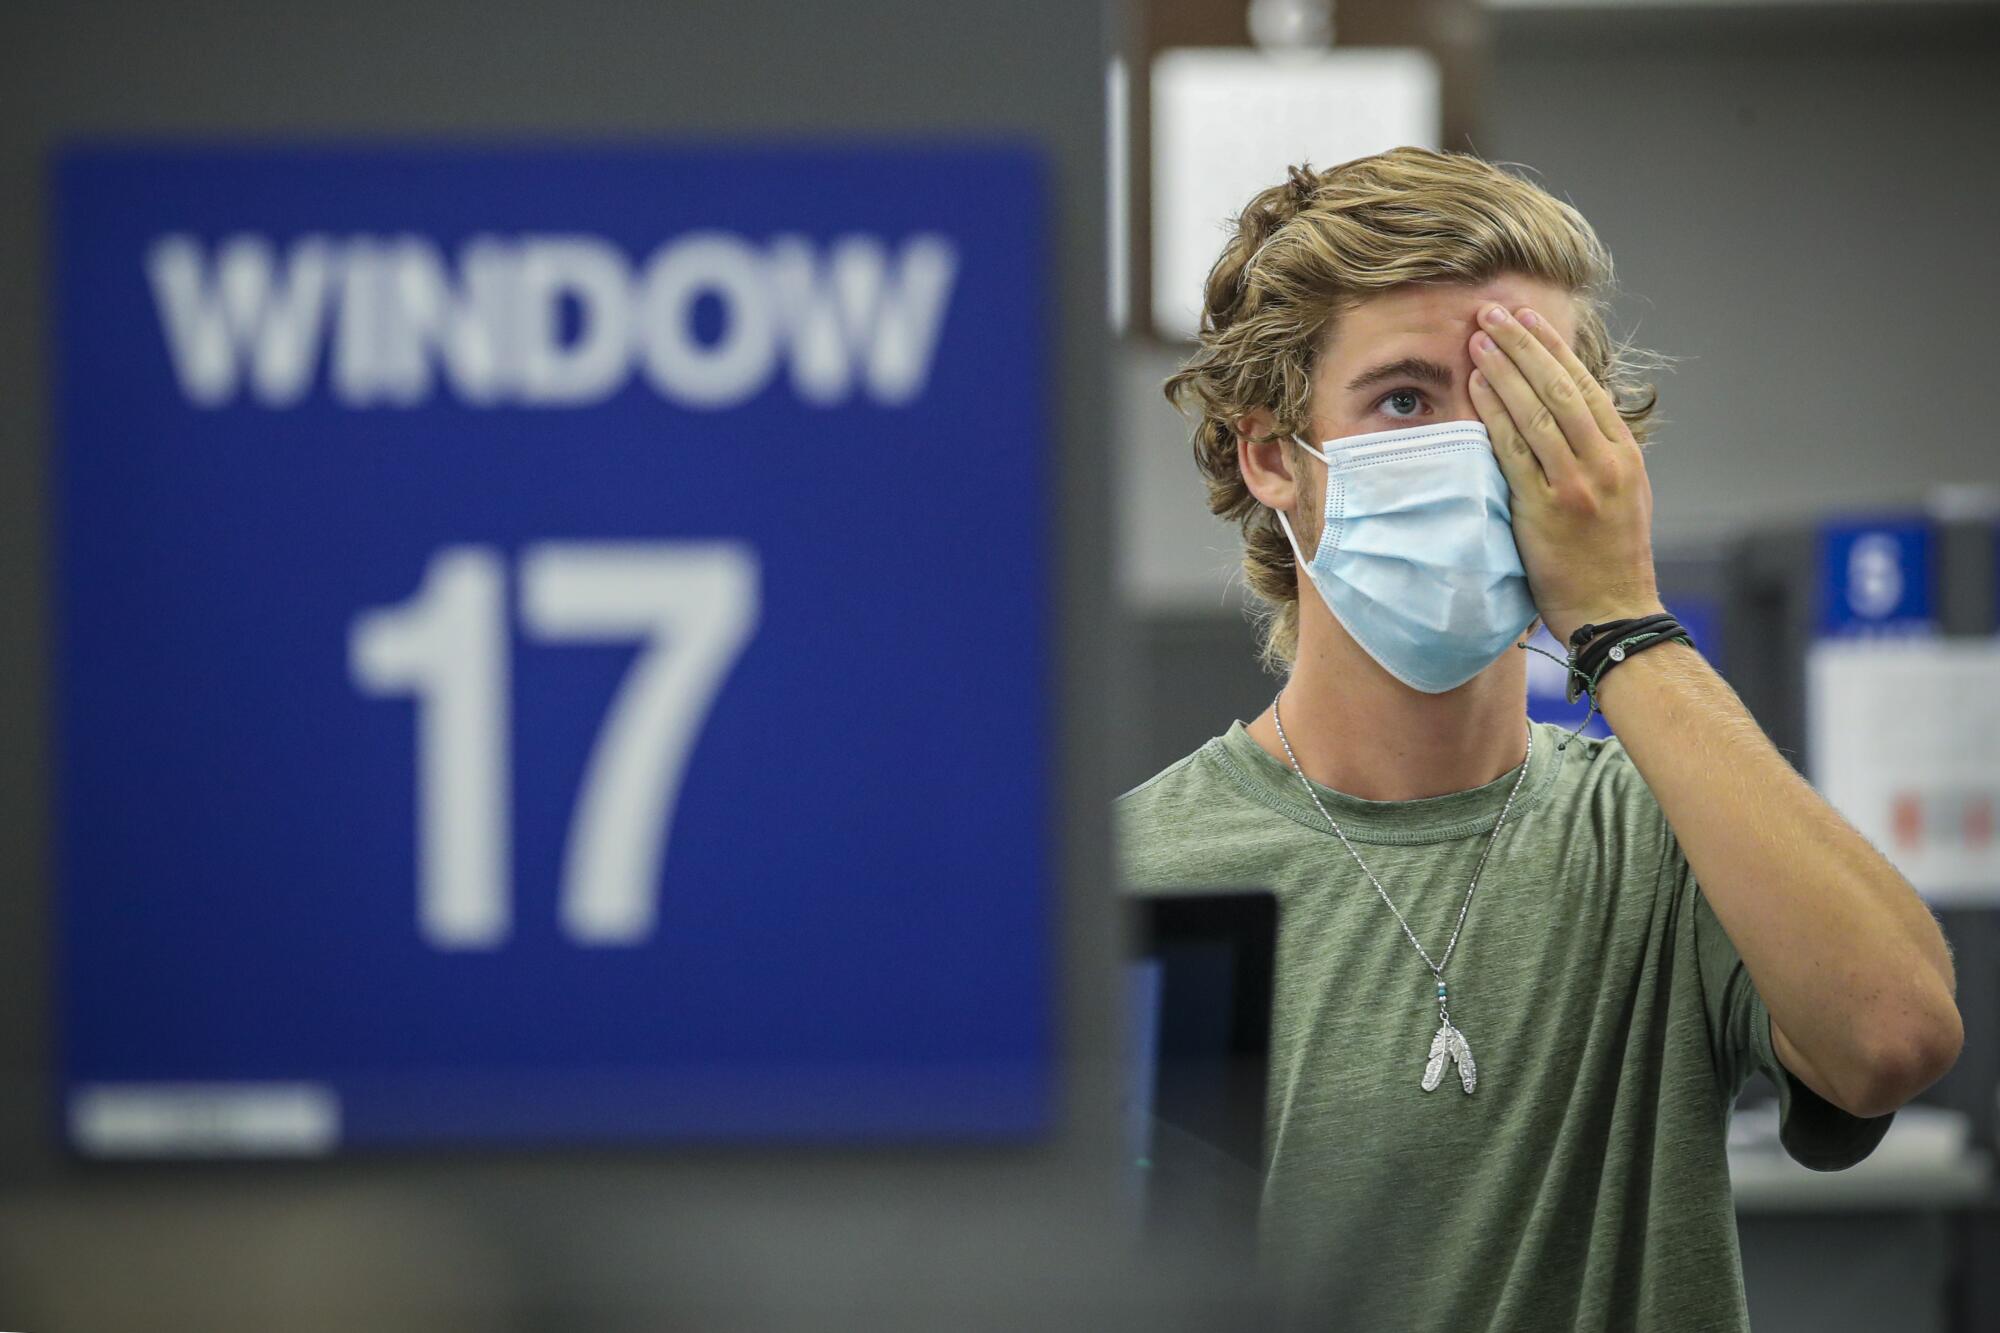 A teenager wearing a mask covers one eye with his hand while applying for his learner's permit at a DMV field office